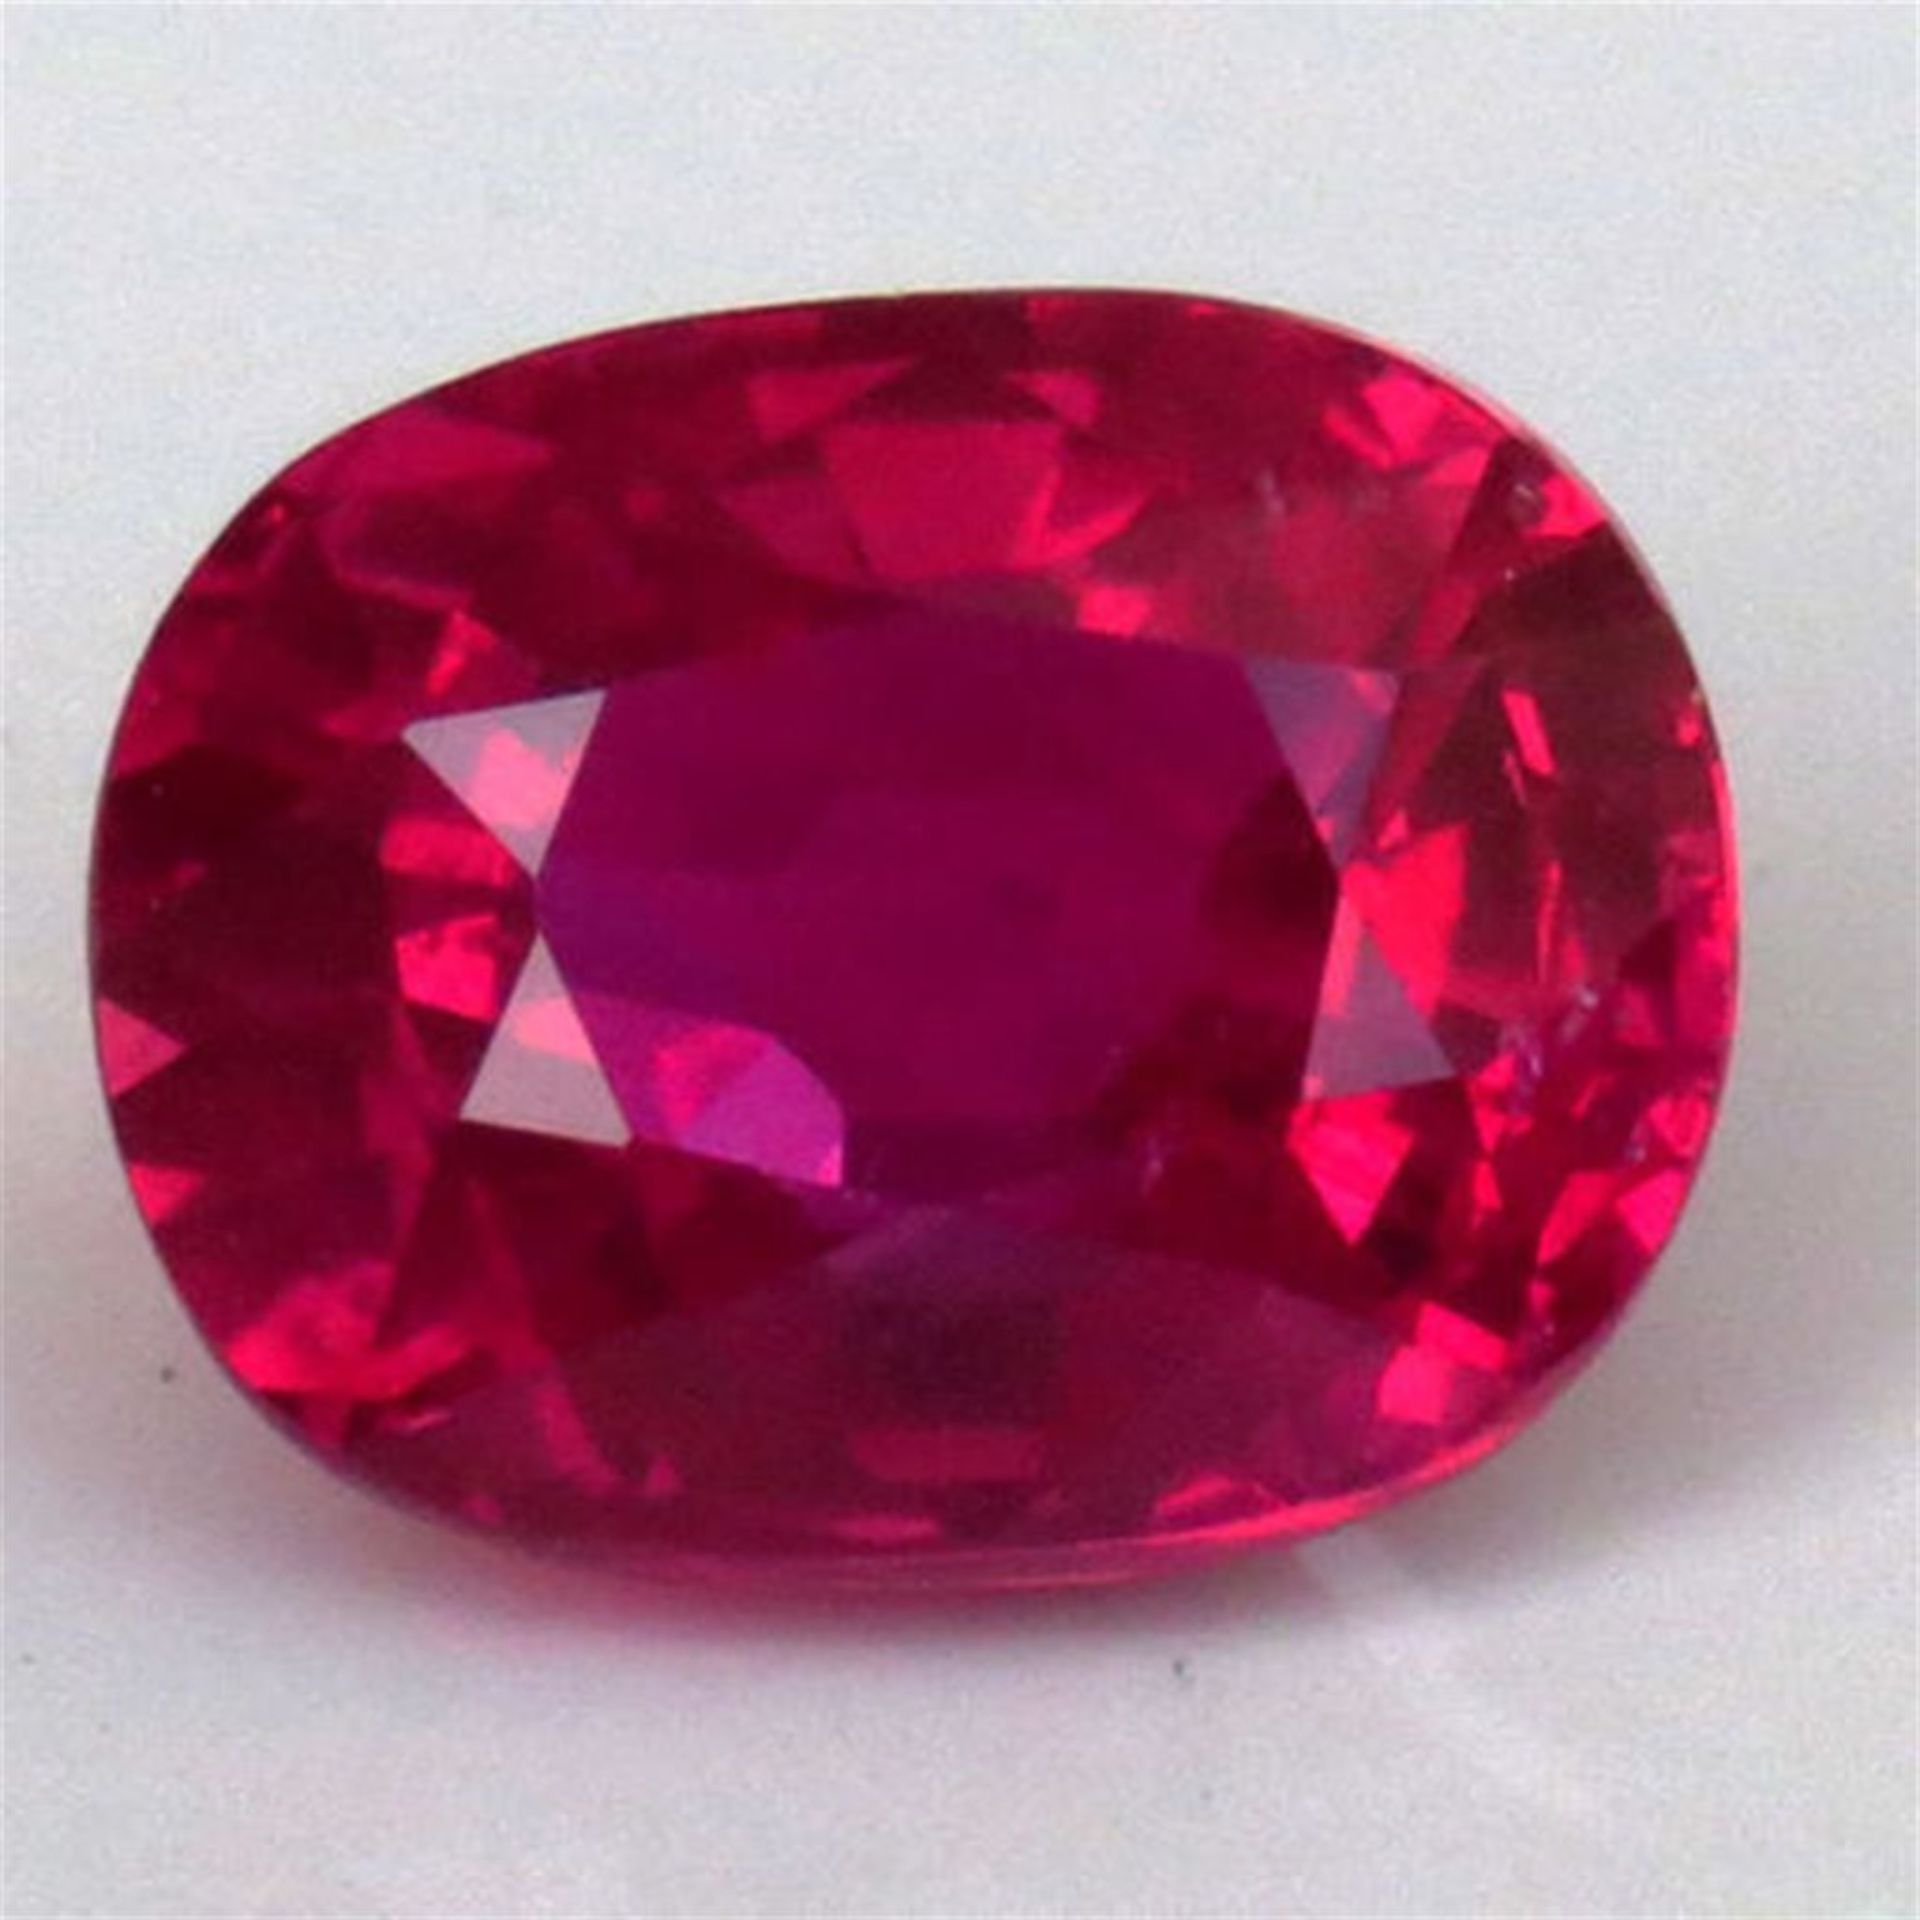 GIA Certified 2.10 ct. Untreated Ruby - BURMA - Image 4 of 5